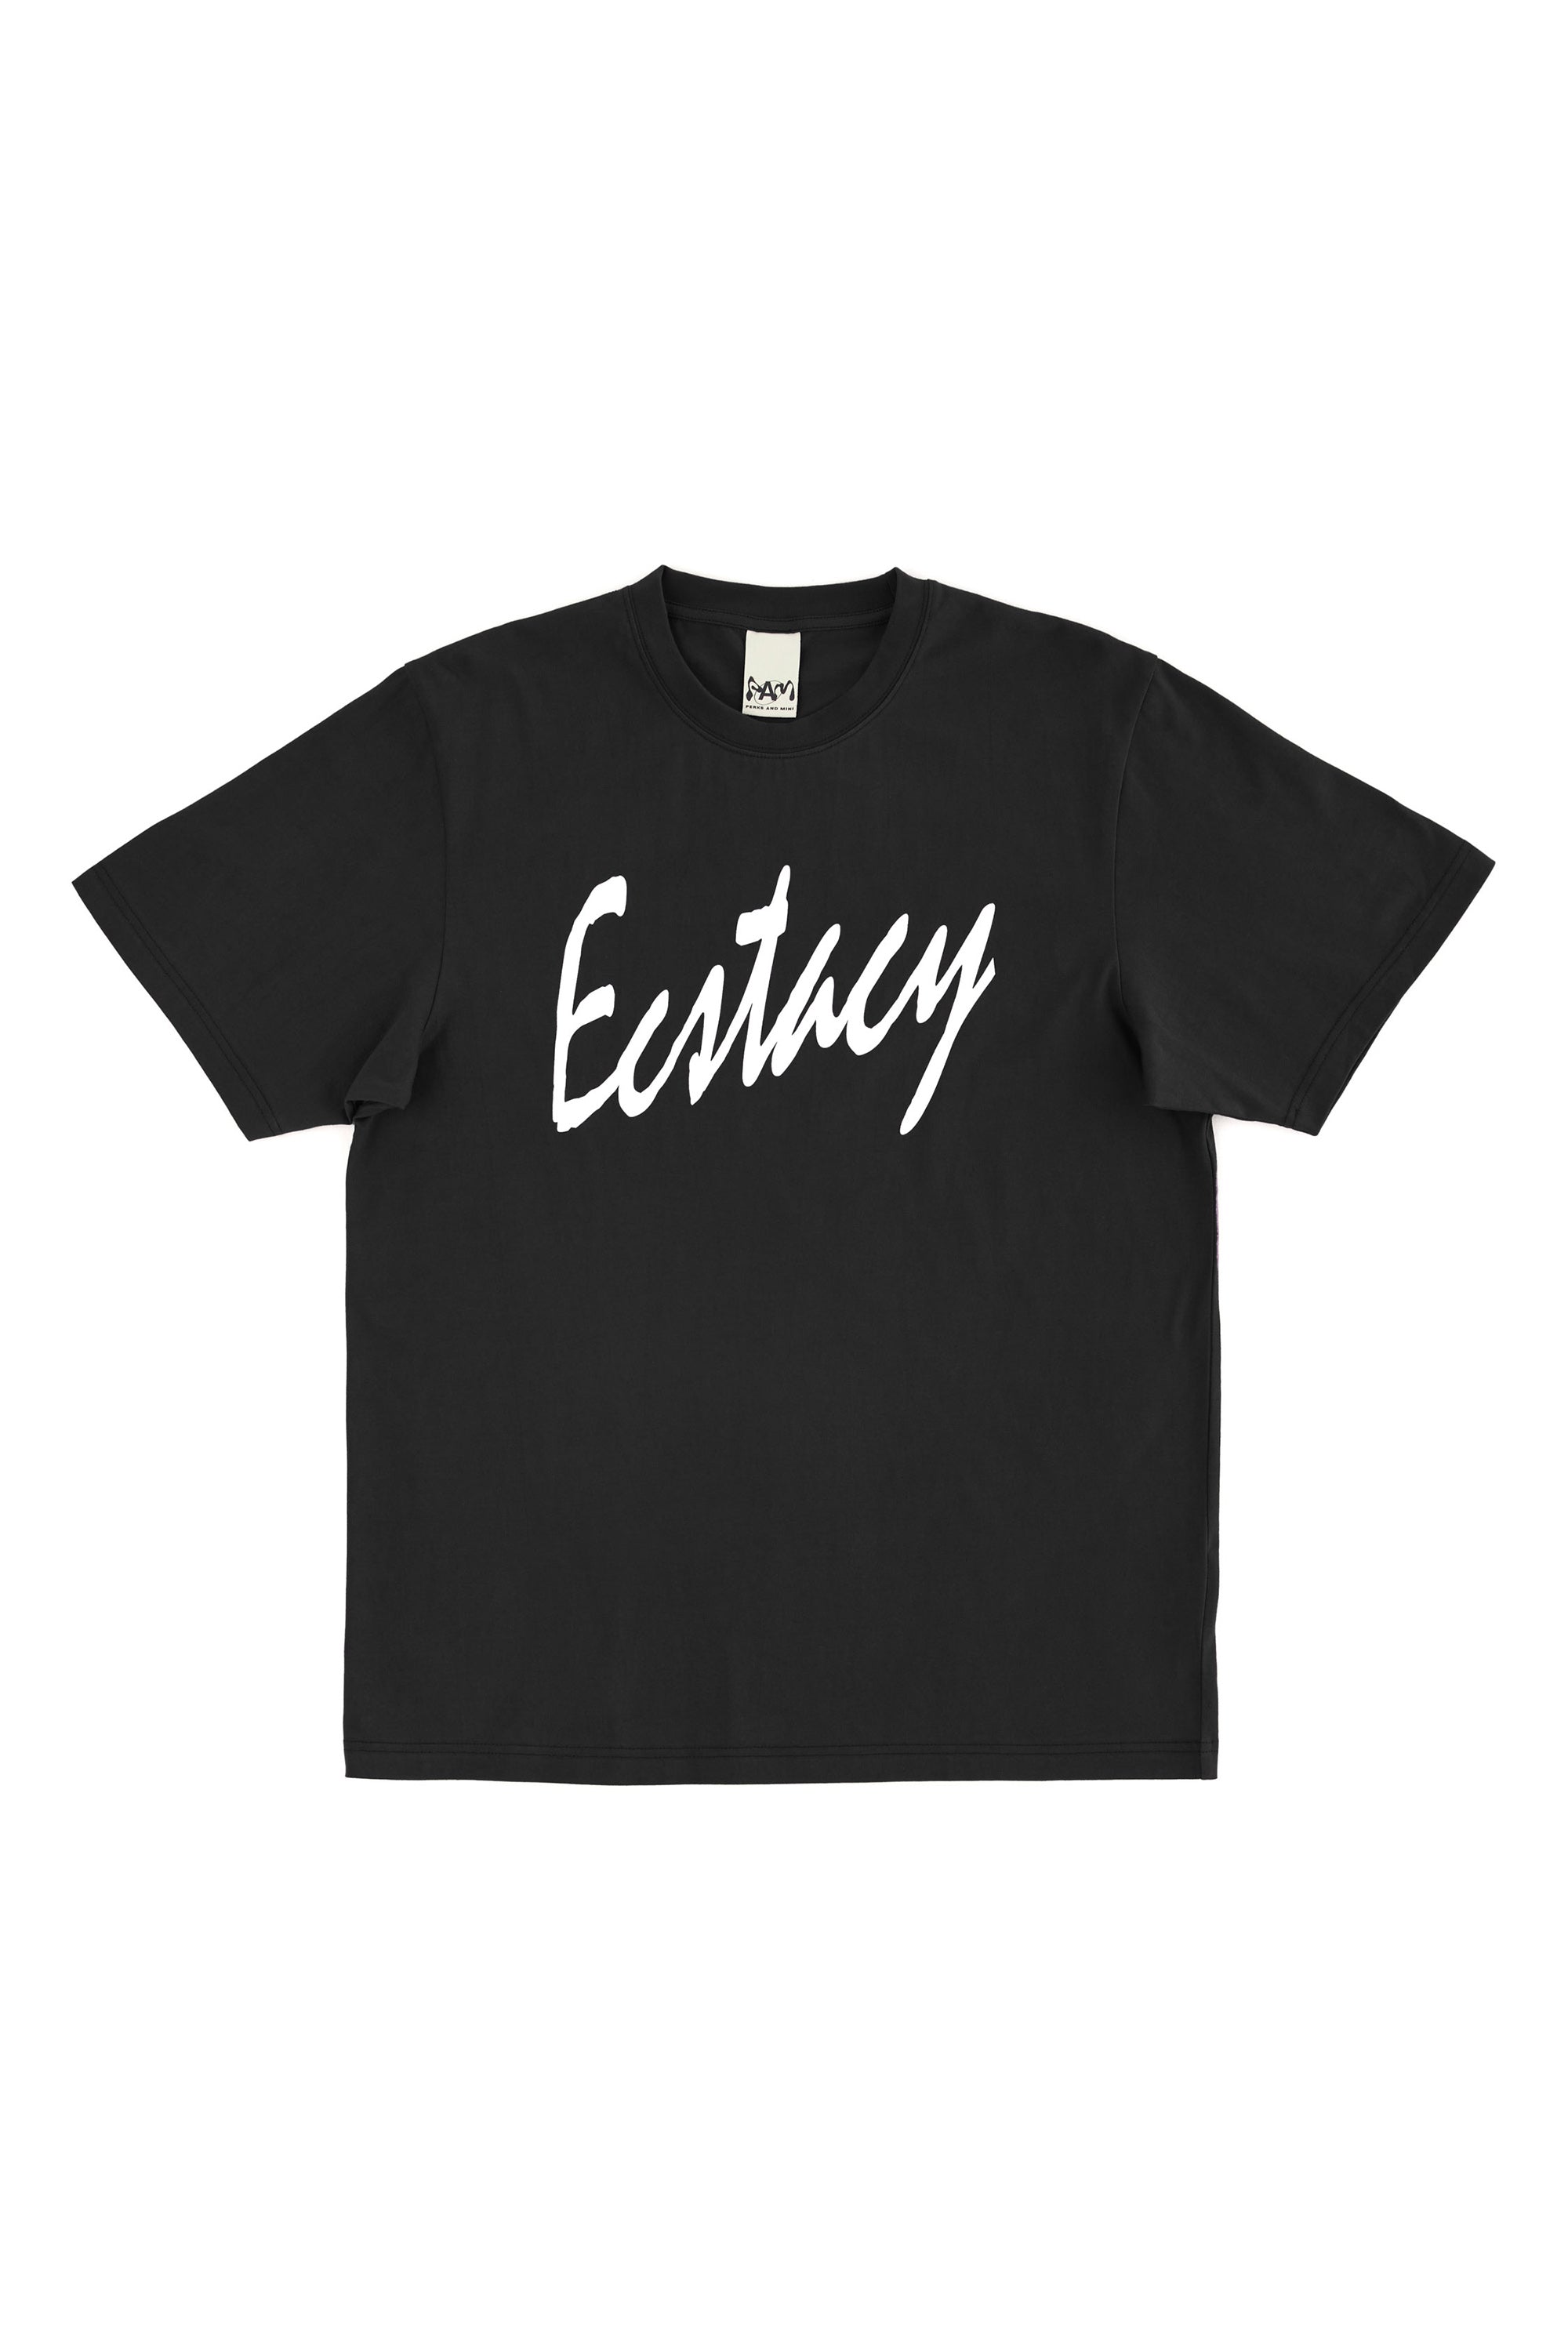 The P. WORLD ECSTACY SS TEE BLACK available online with global shipping, and in PAM Stores Melbourne and Sydney.